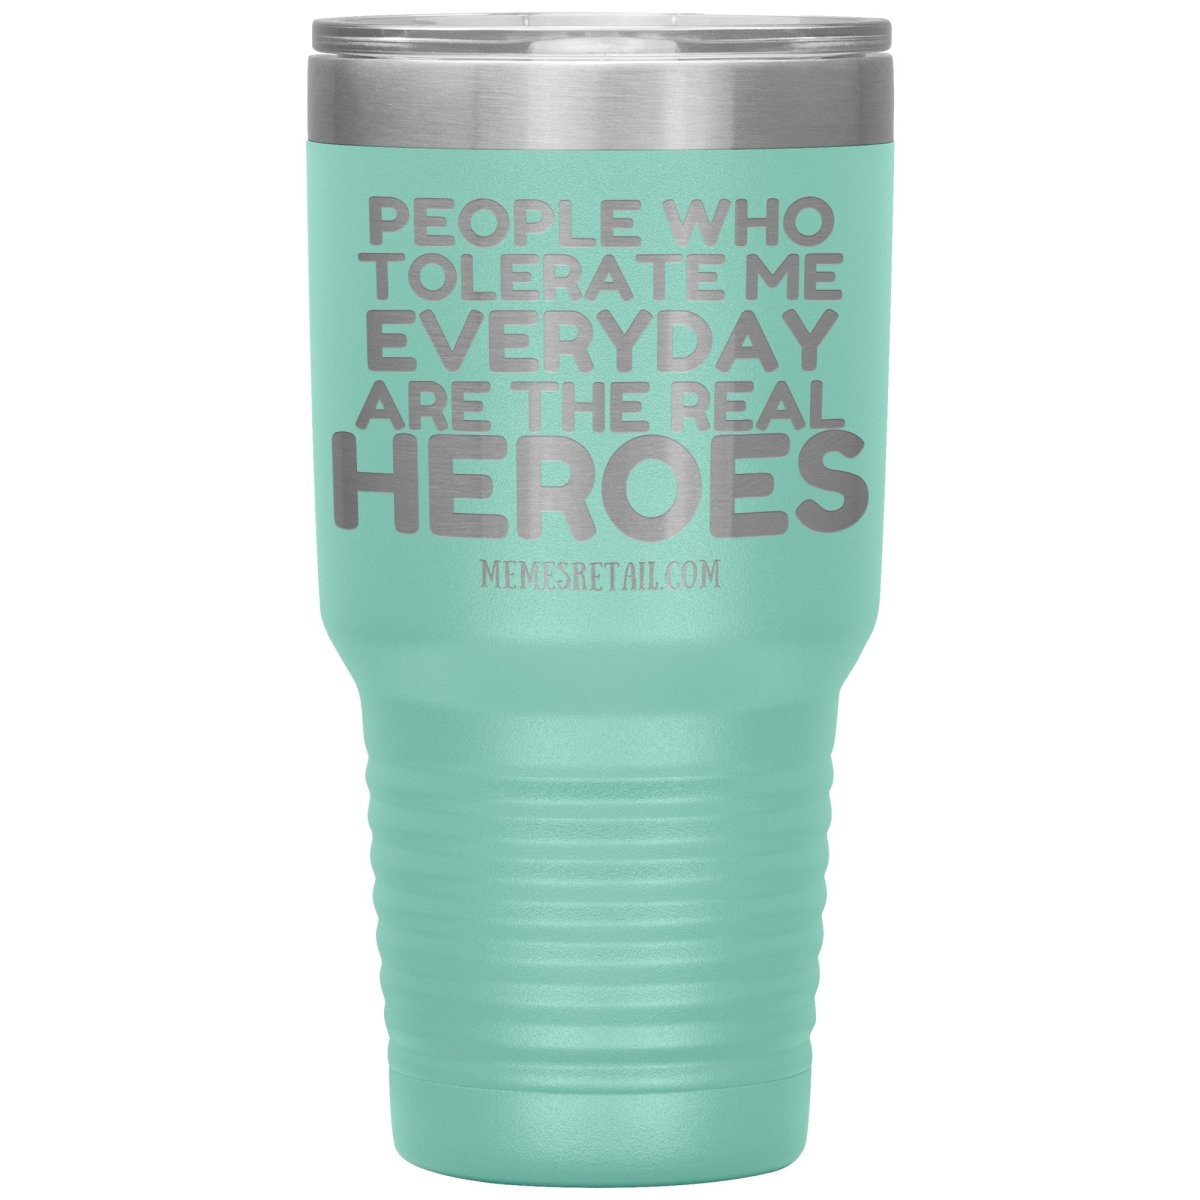 People Who Tolerate Me Everyday Are The Real Heroes Tumblers, 30oz Insulated Tumbler / Teal - MemesRetail.com